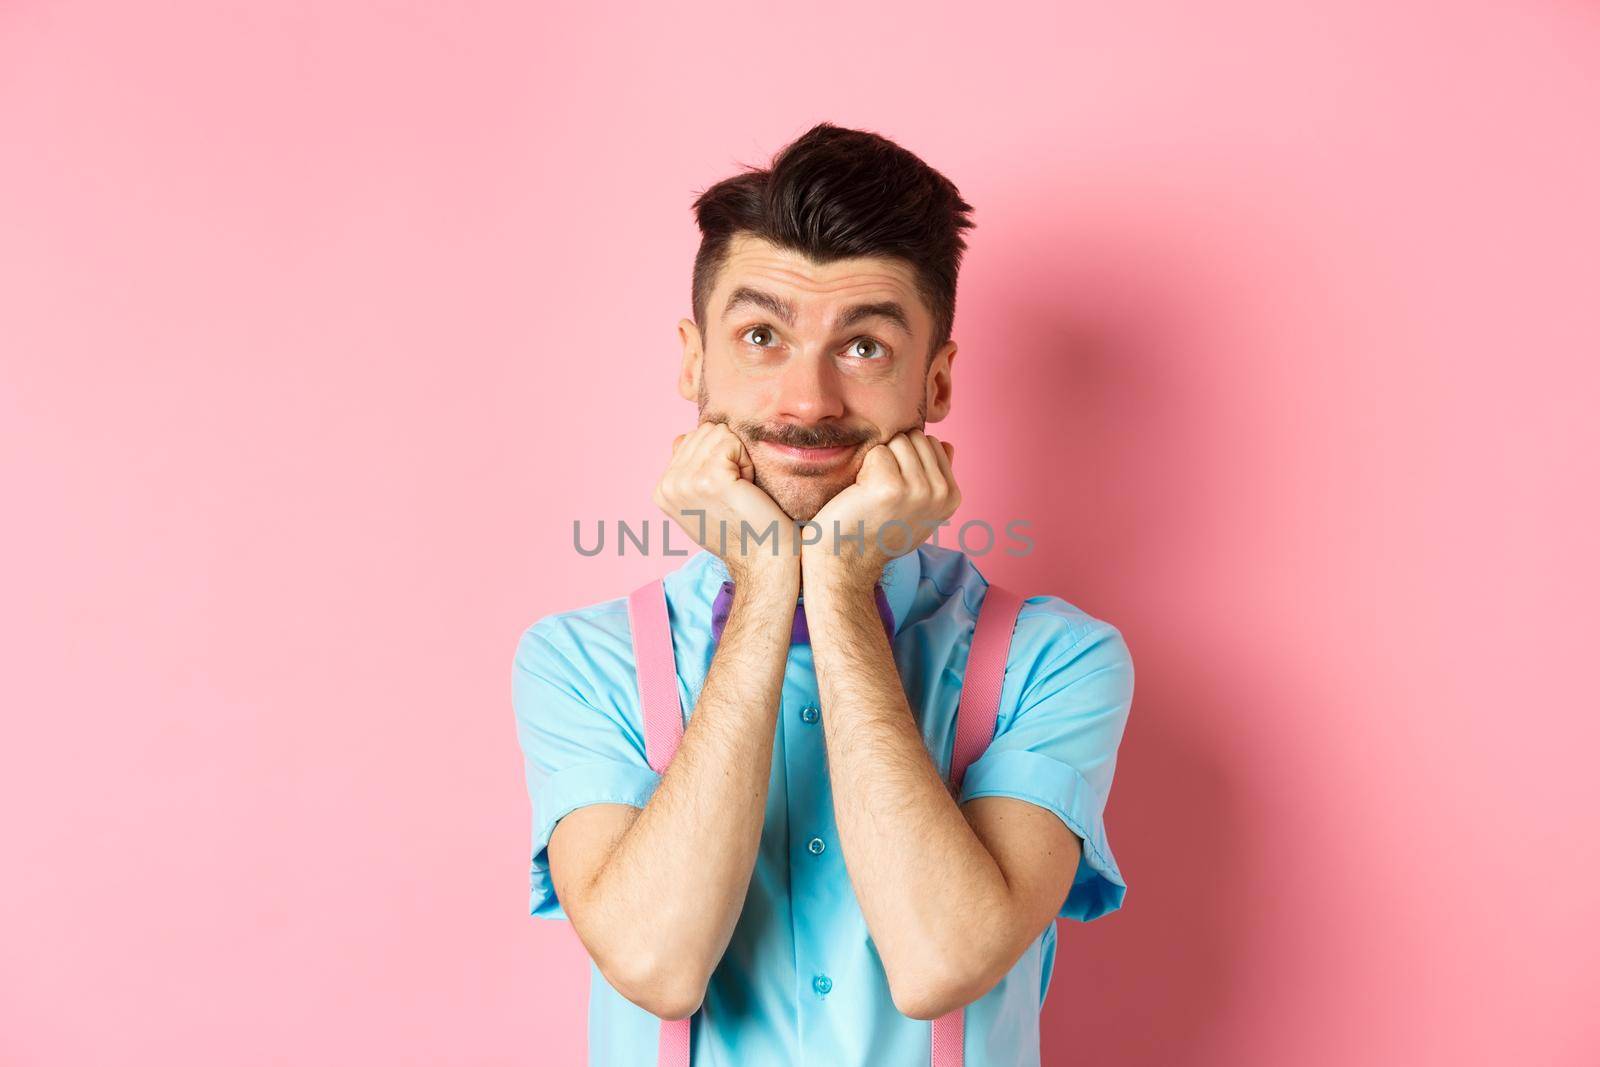 Silly young man leaning on hands and looking up, dreaming of something, imaging things on pink background.